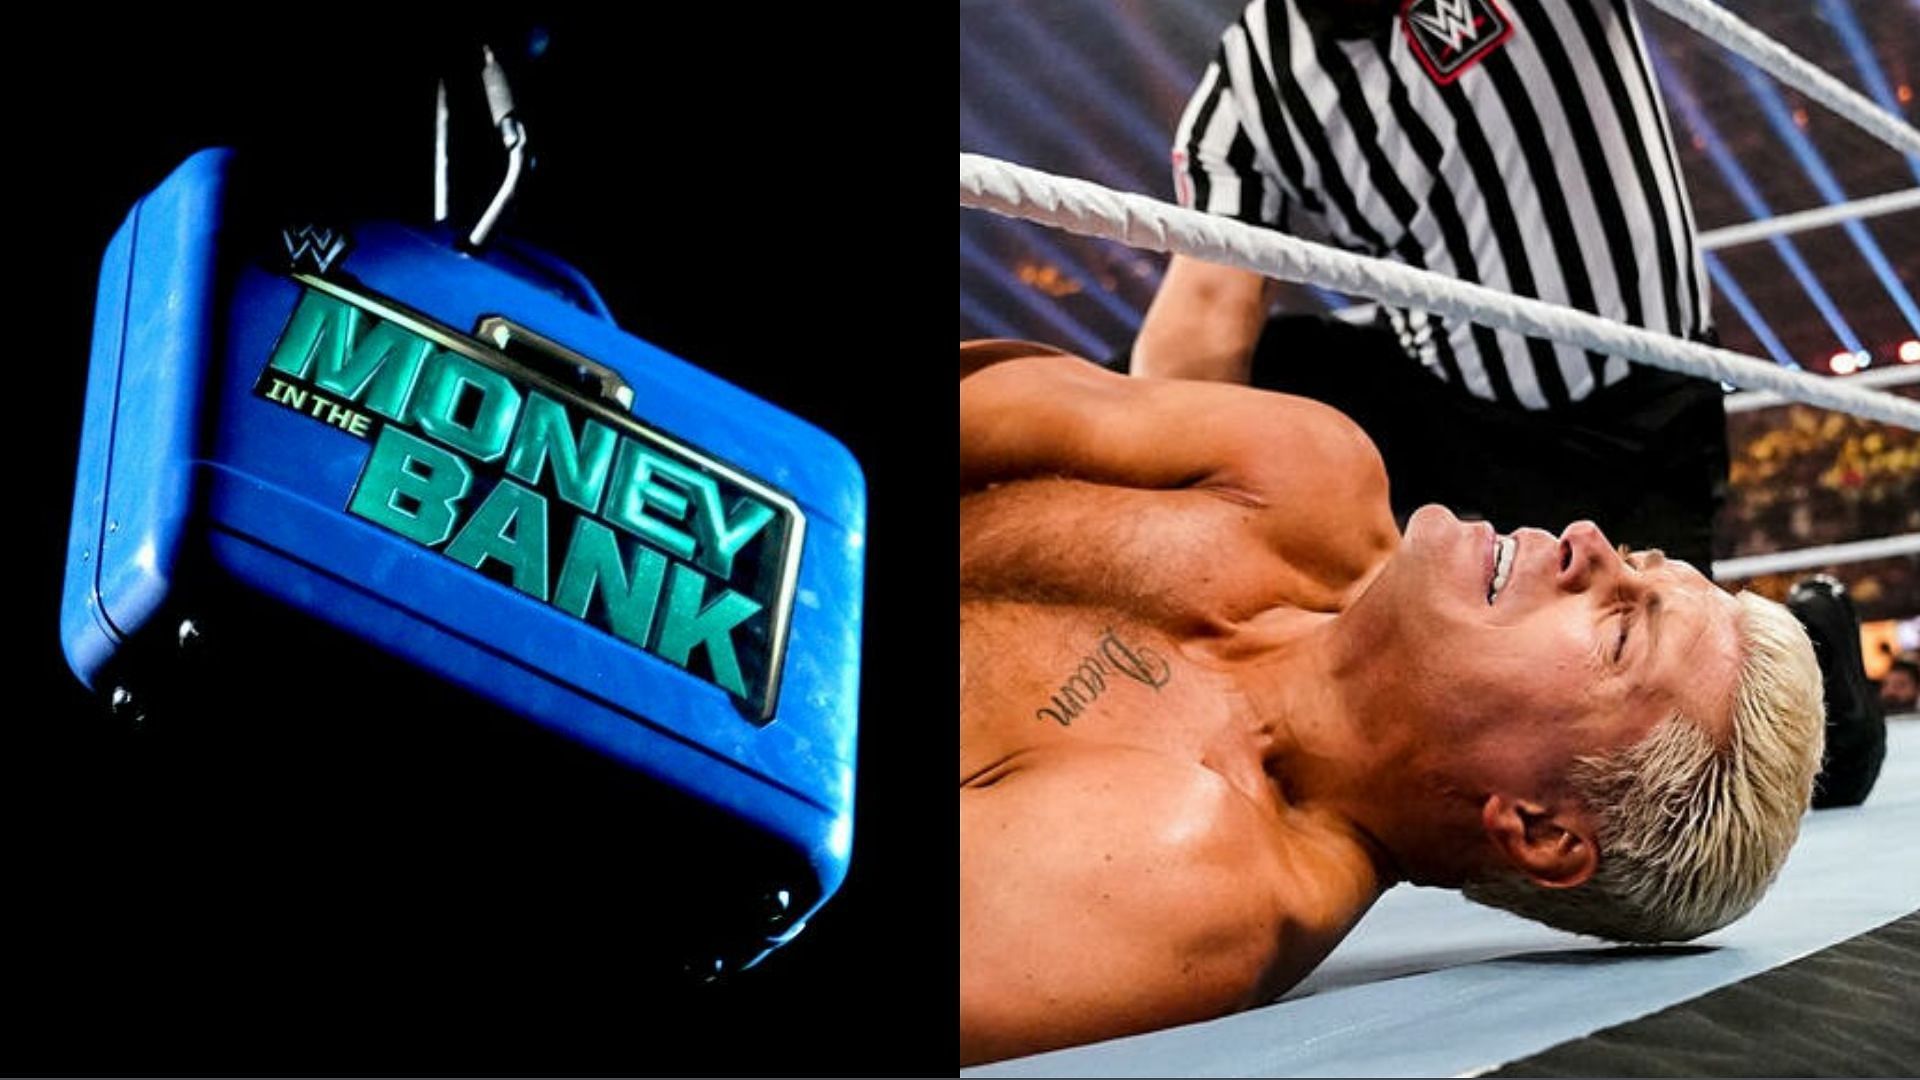 Could the potential MITB winner dethrone Cody Rhodes?